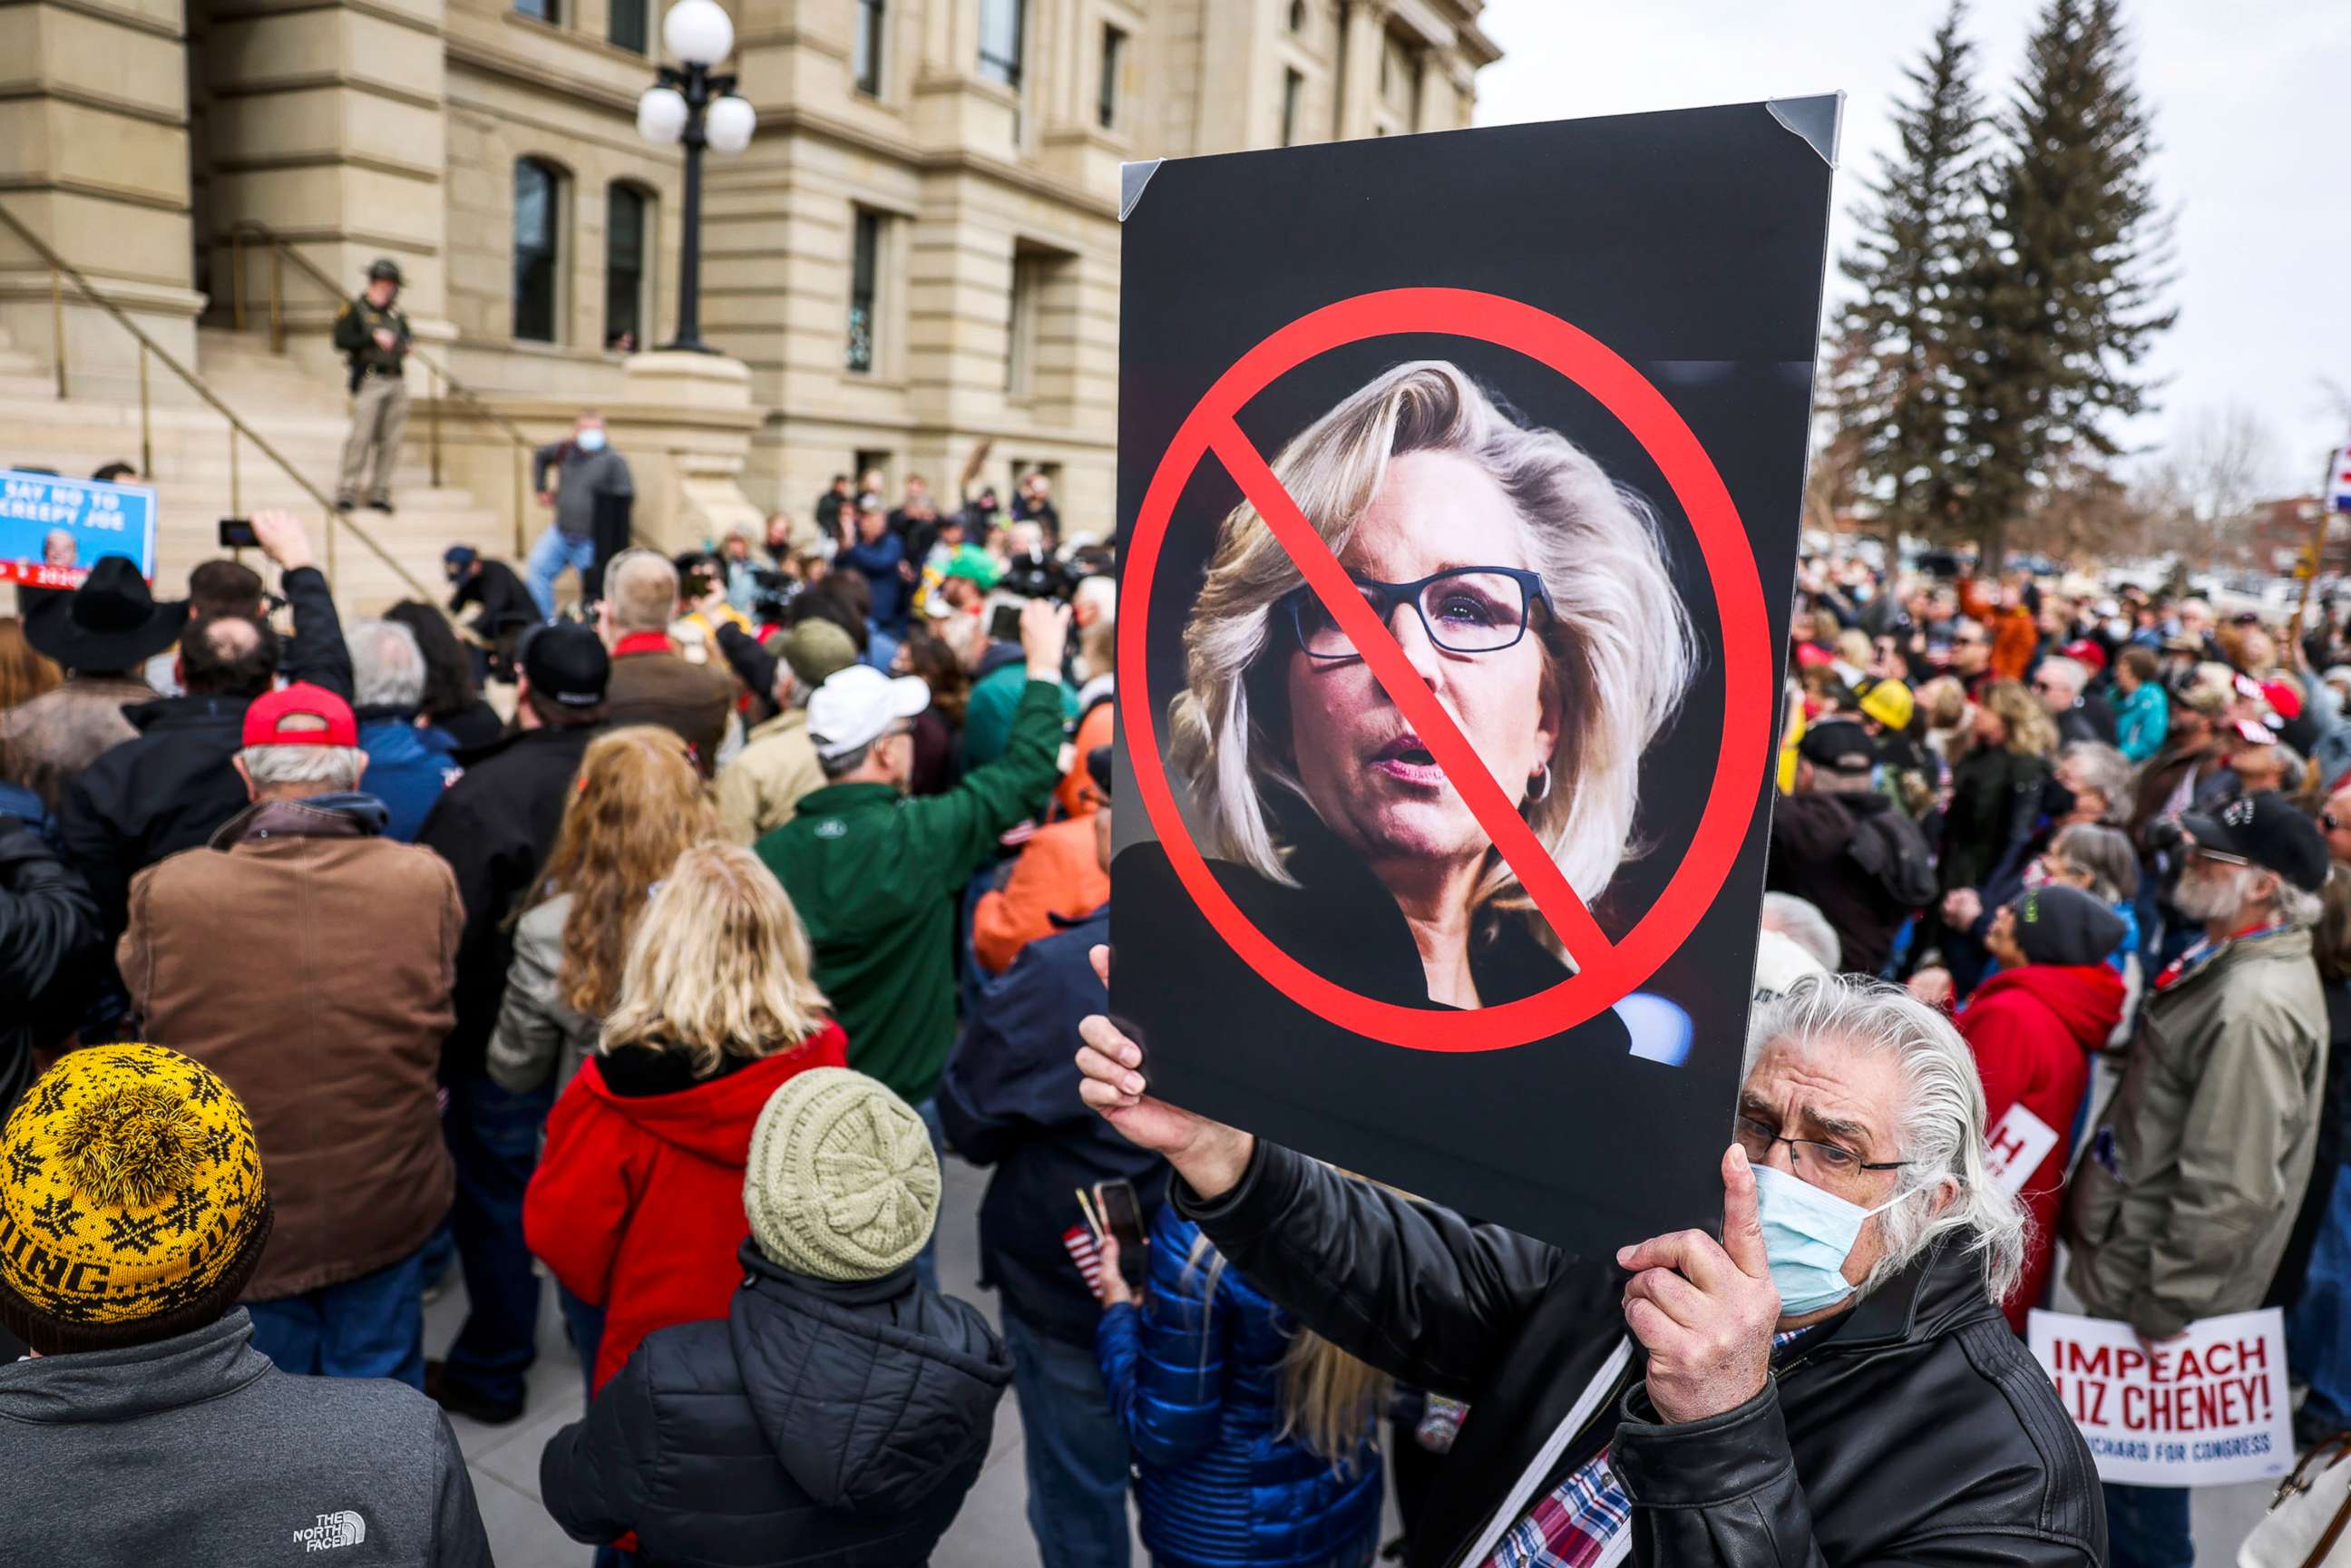 PHOTO: A sign against Rep. Liz Cheney is held up in the crowd as Rep. Matt Gaetz speaks during a rally against her in Cheyenne, Wyo., Jan. 28, 2021.